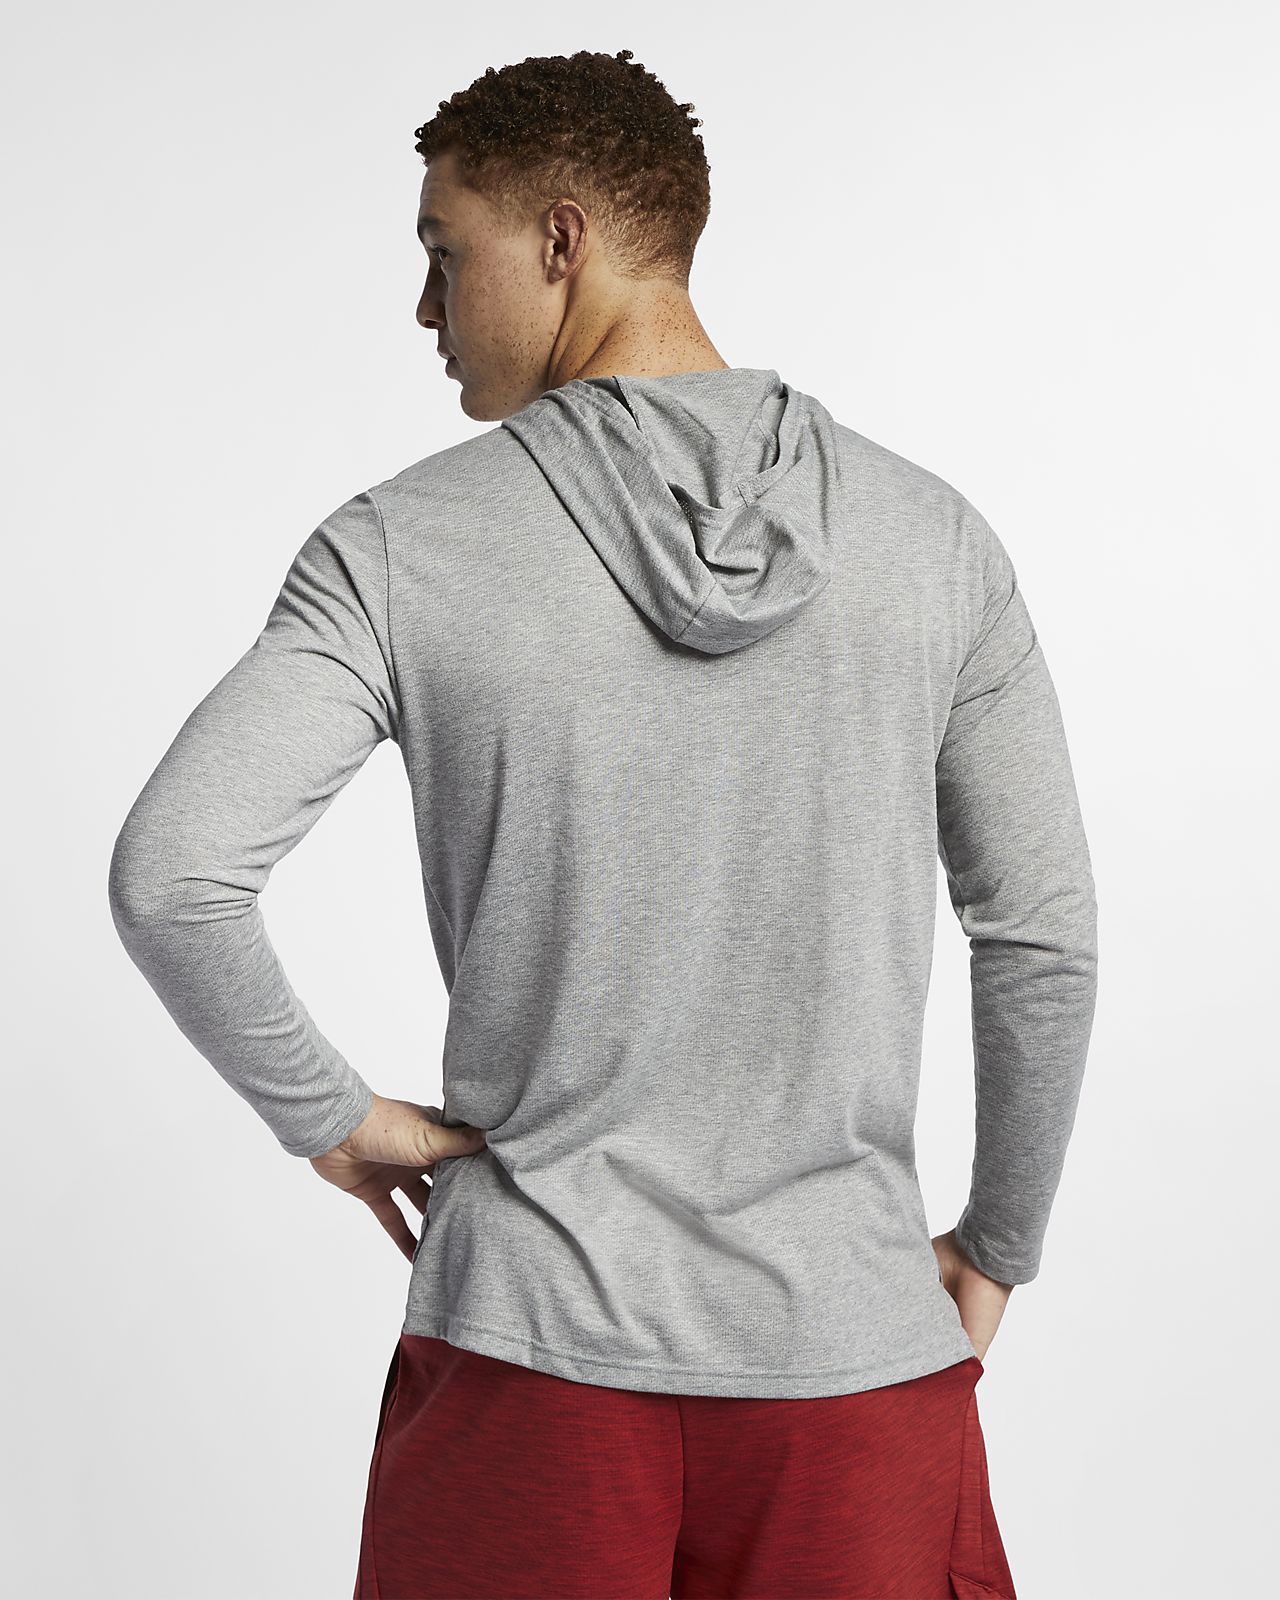 nike thin pullover - dsvdedommel 